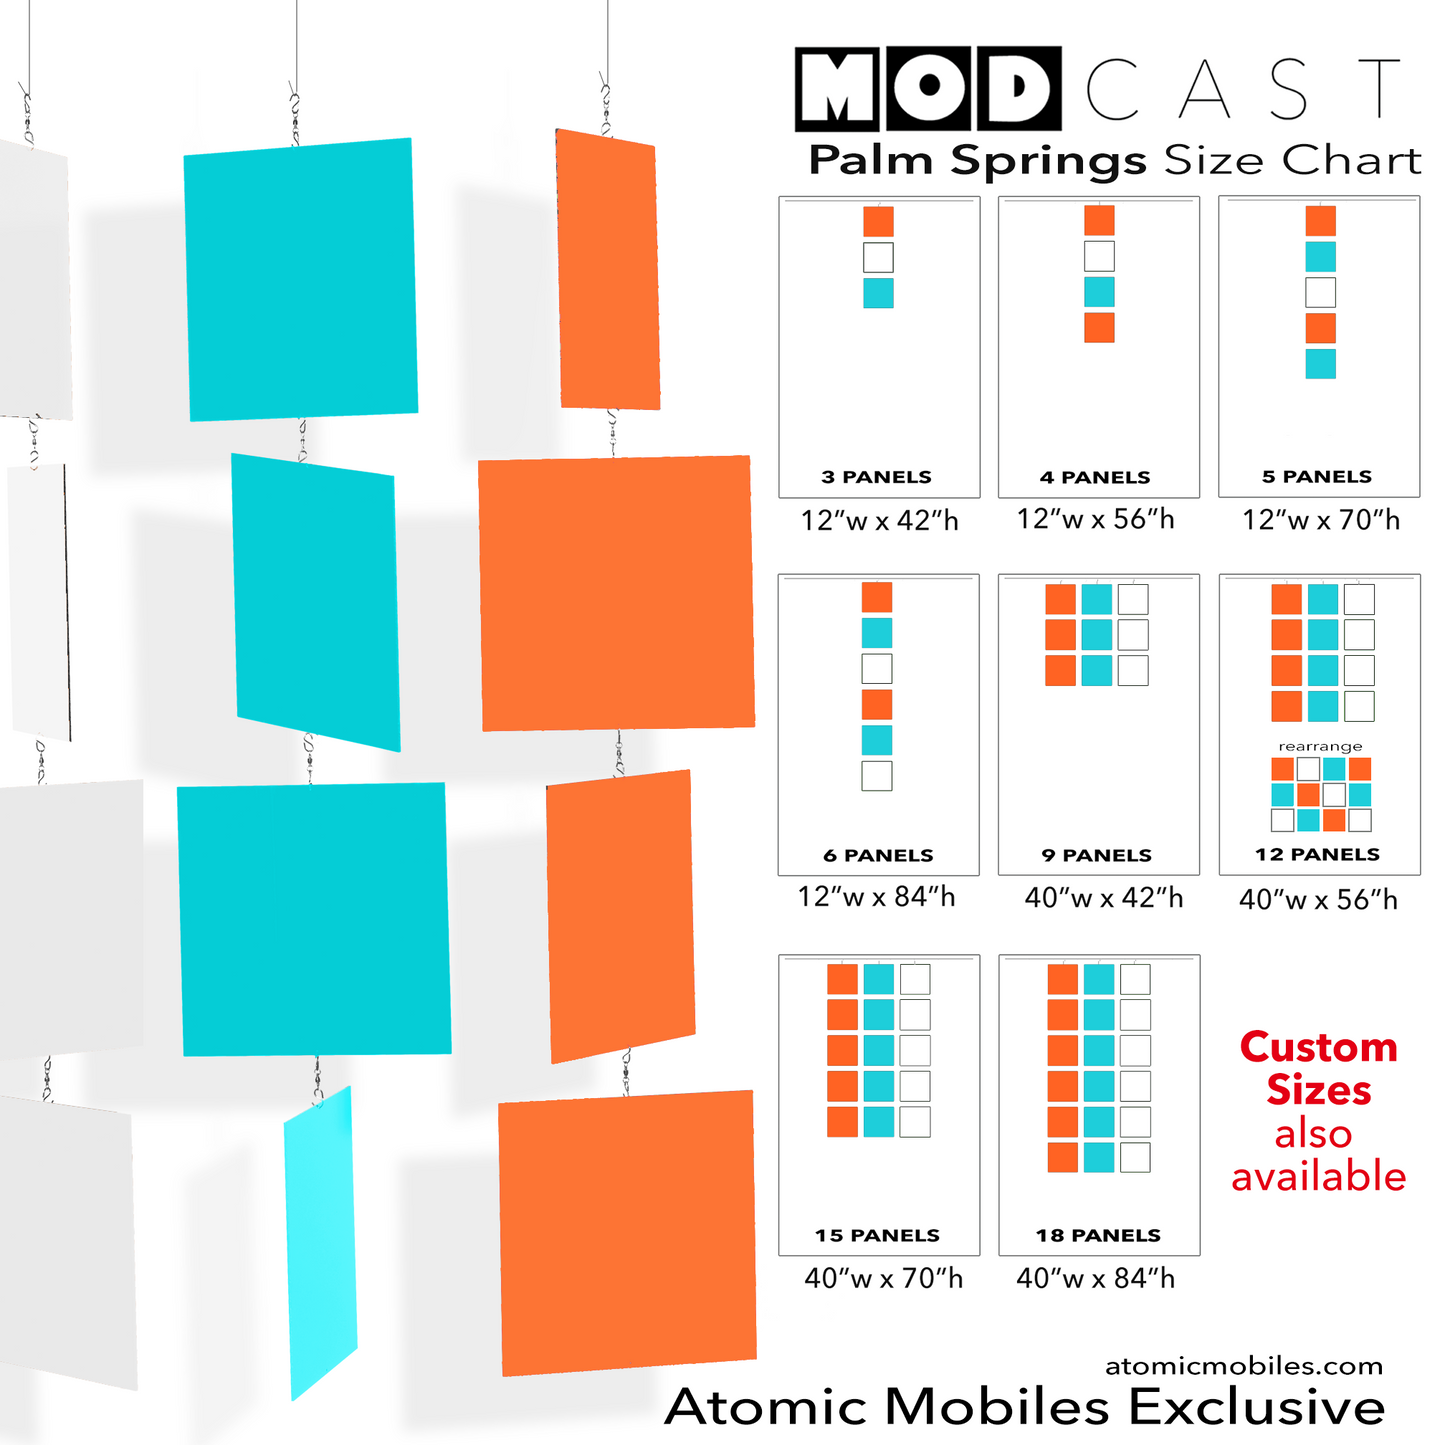 Size Chart for Palm Springs MODcast Hanging Art Mobiles in Orange, Aqua Blue, and White - mid century modern style kinetic art by AtomicMobiles.com